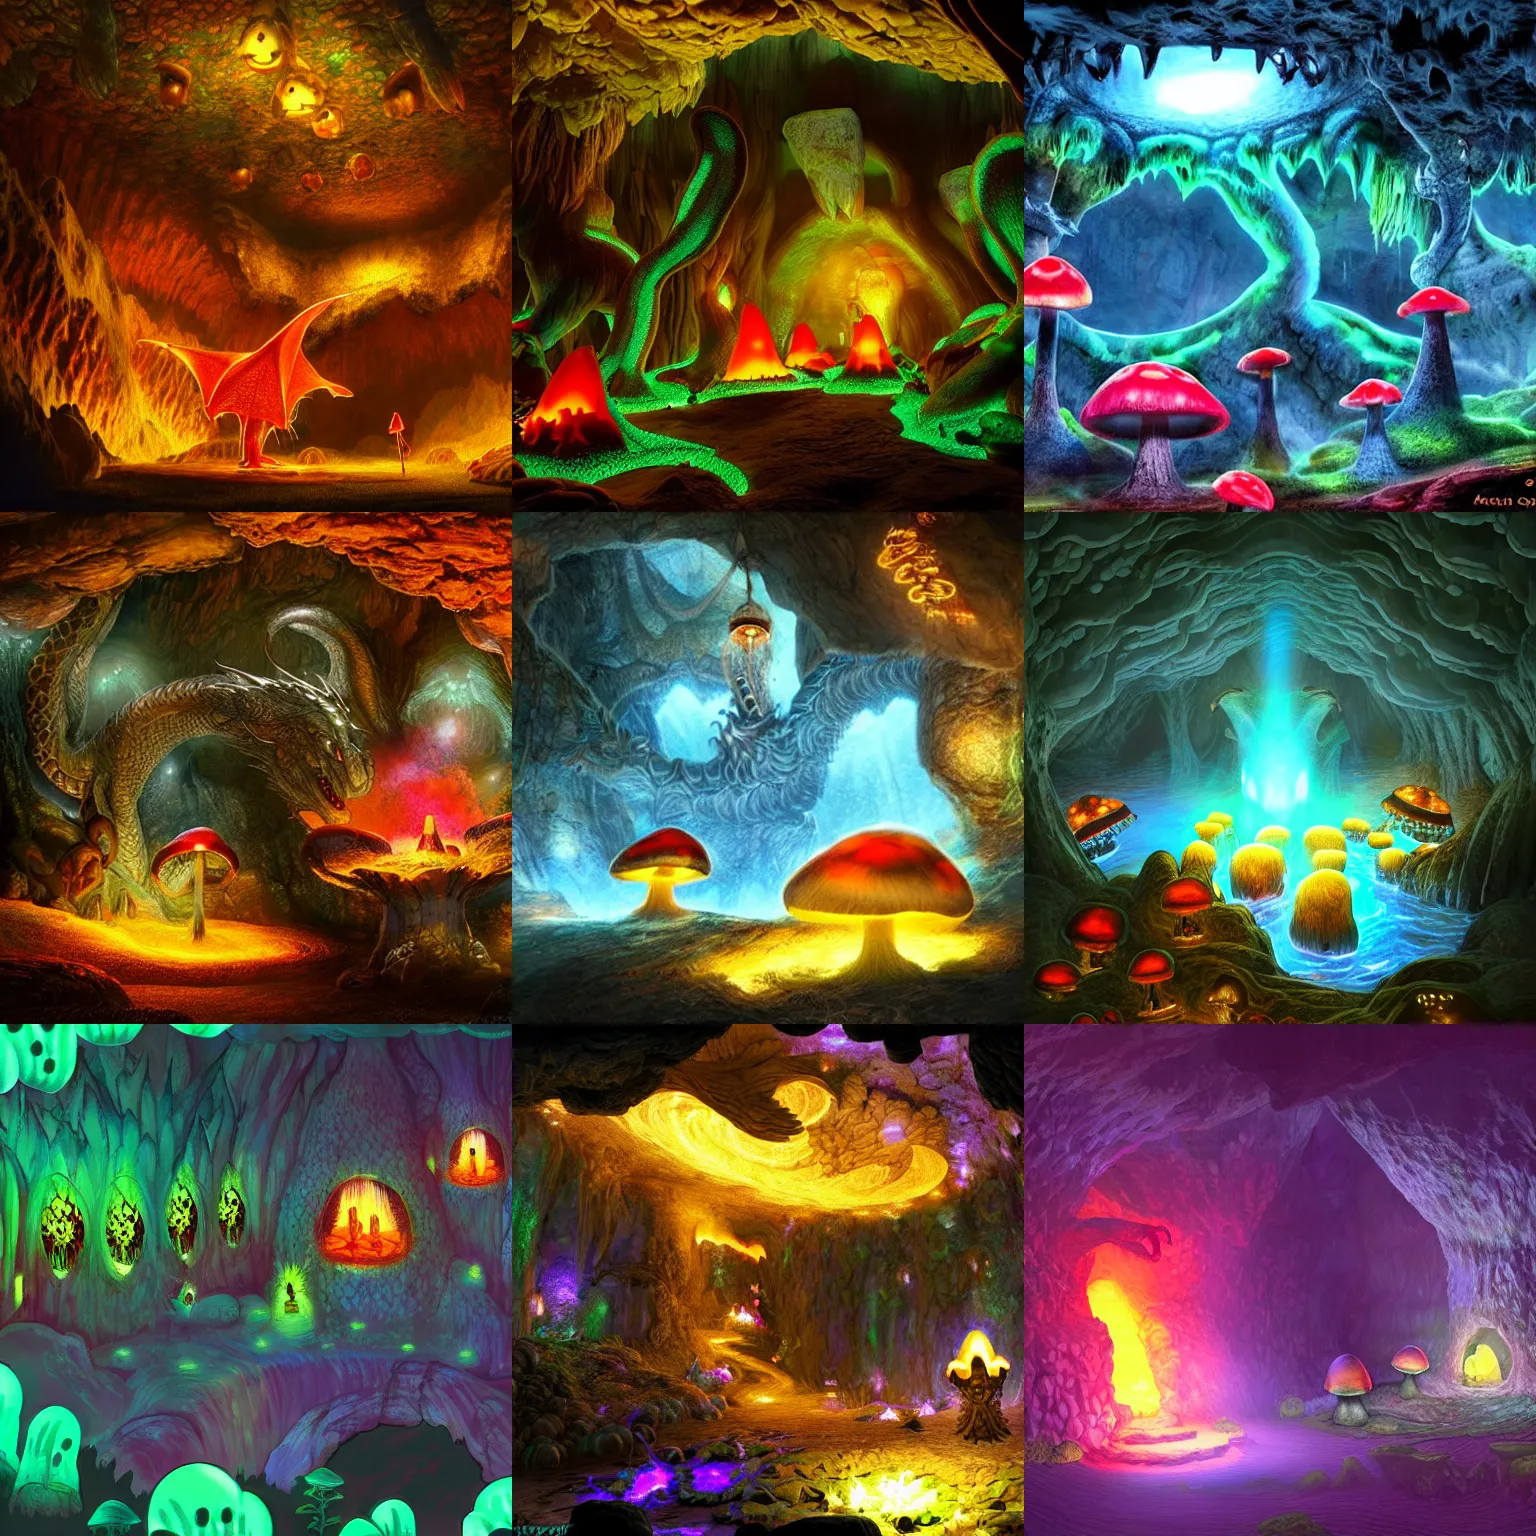 Prompt: a fantasy cave filled with glowing mushrooms with a large dragon within